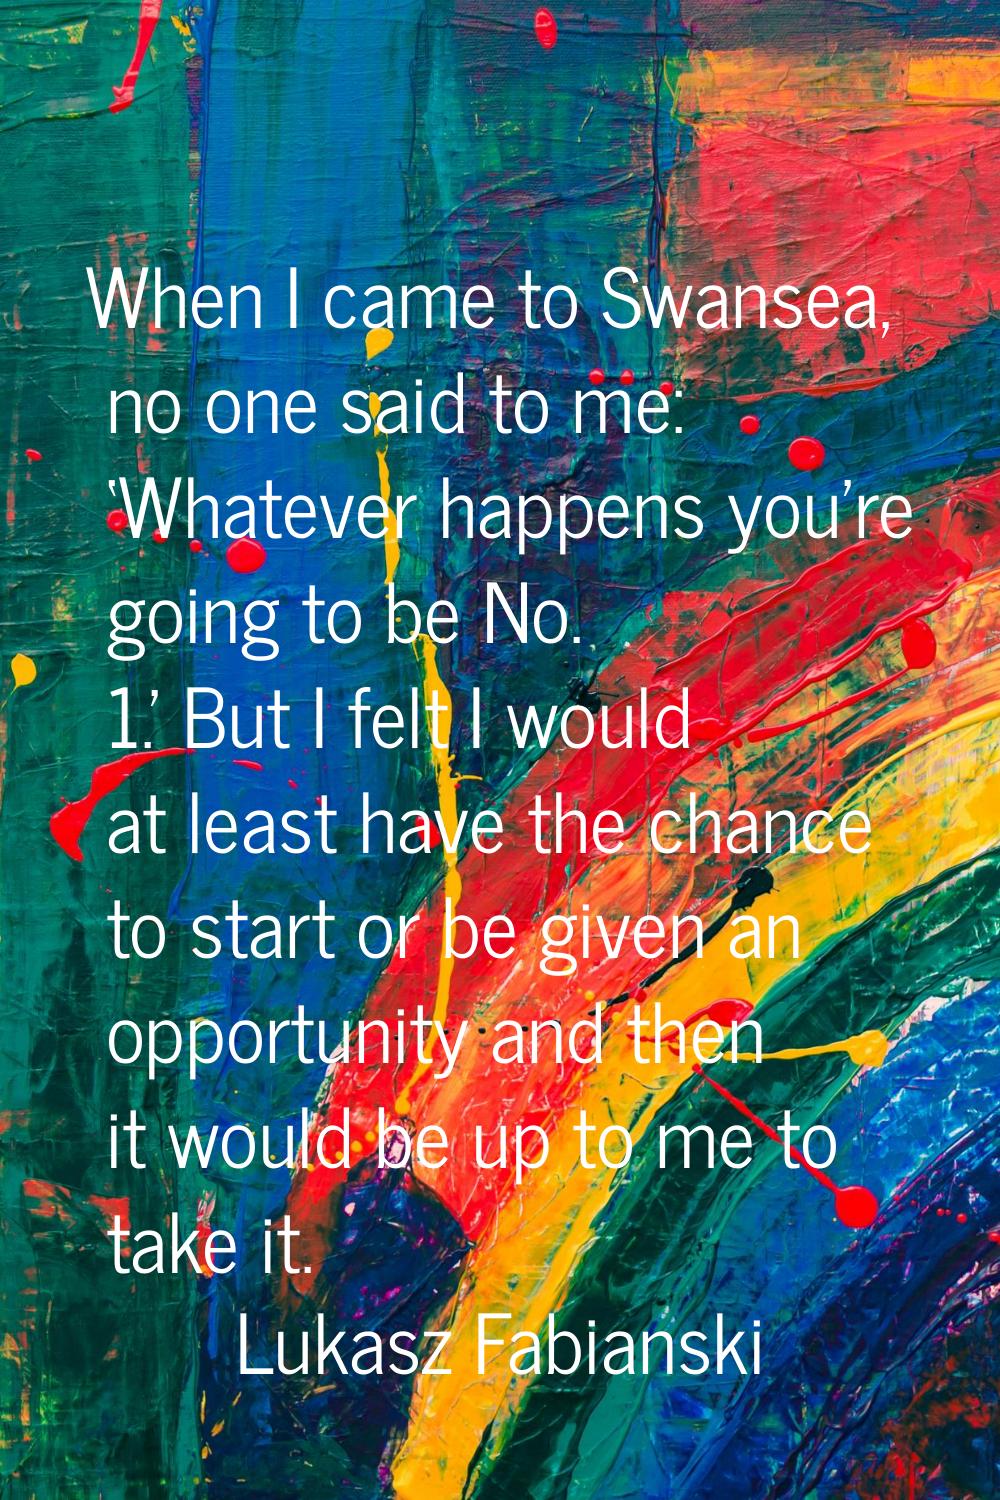 When I came to Swansea, no one said to me: ‘Whatever happens you're going to be No. 1.' But I felt 